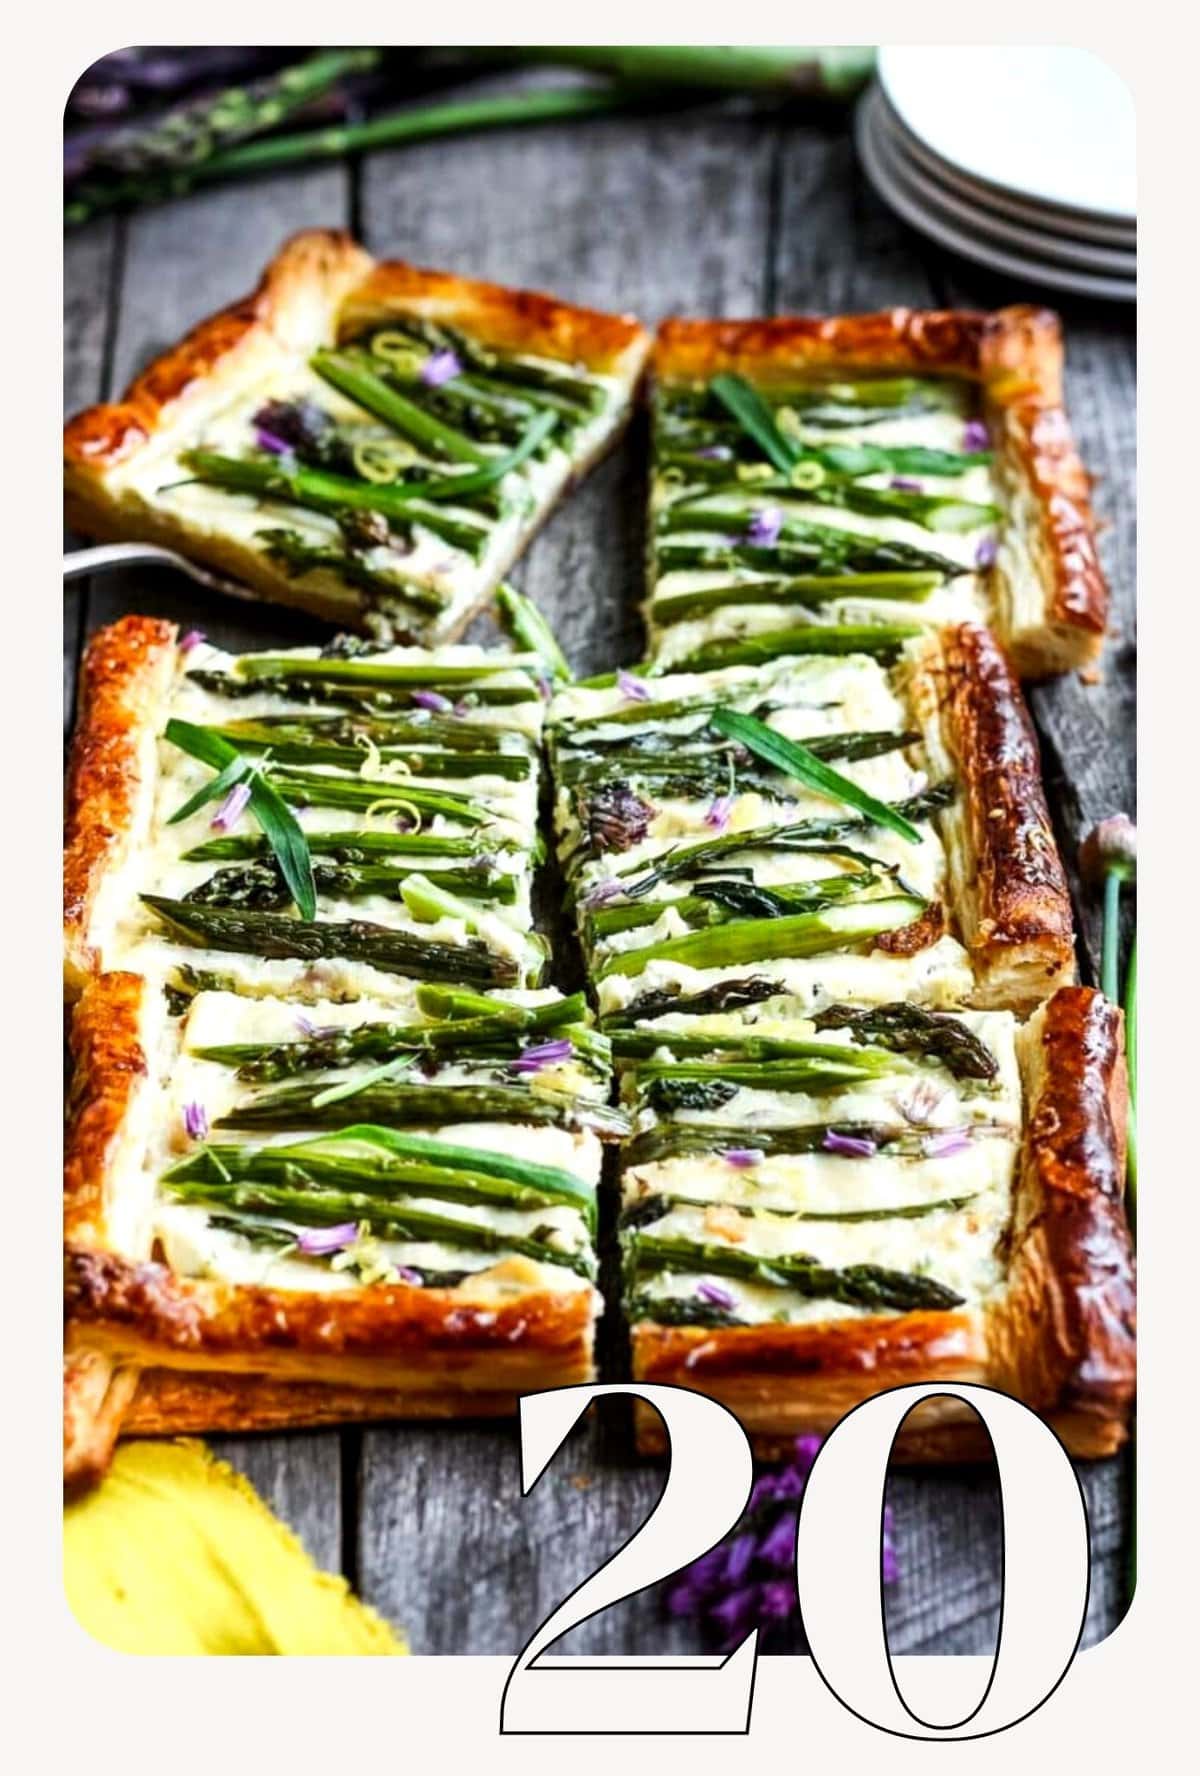 20 Best Asparagus Recipes to make this Spring! Roasted asparagus, grilled asparagus, asparagus salads, asparagus pasta, we've got you covered!